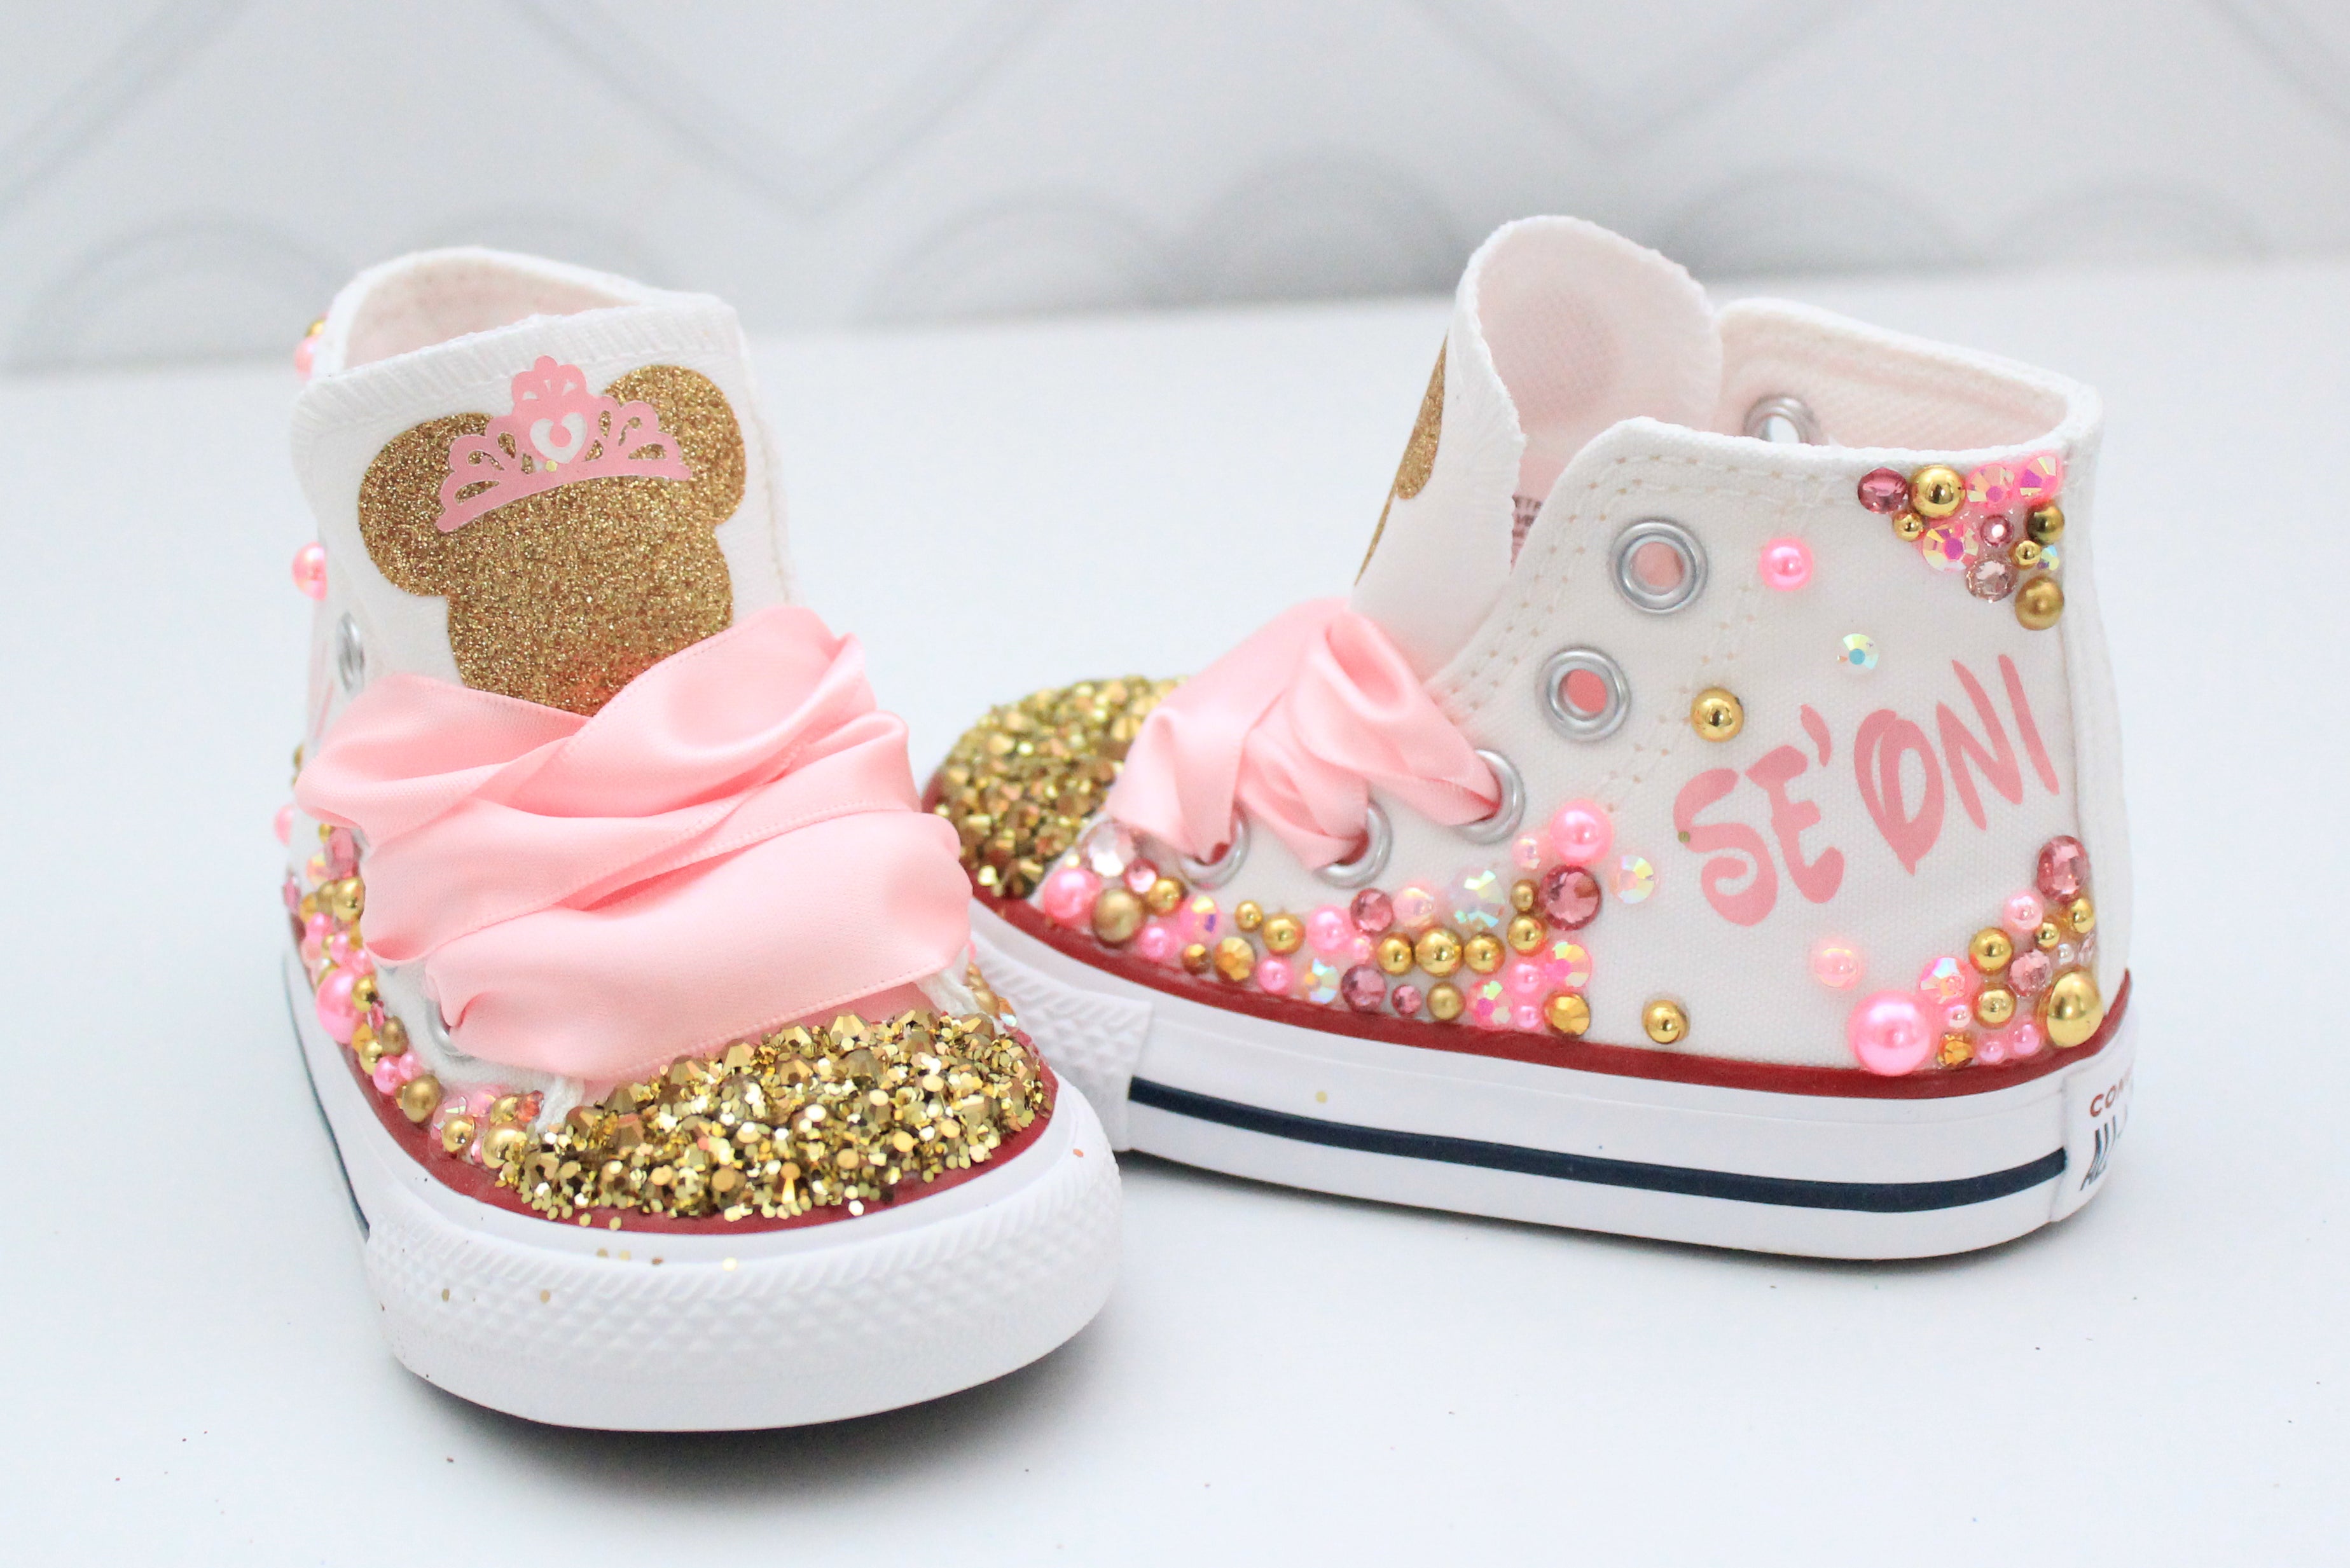 Minnie Mouse shoes- Minnie Mouse bling Converse-Girls Minnie Mouse Shoes-Minnie Mouse Converse